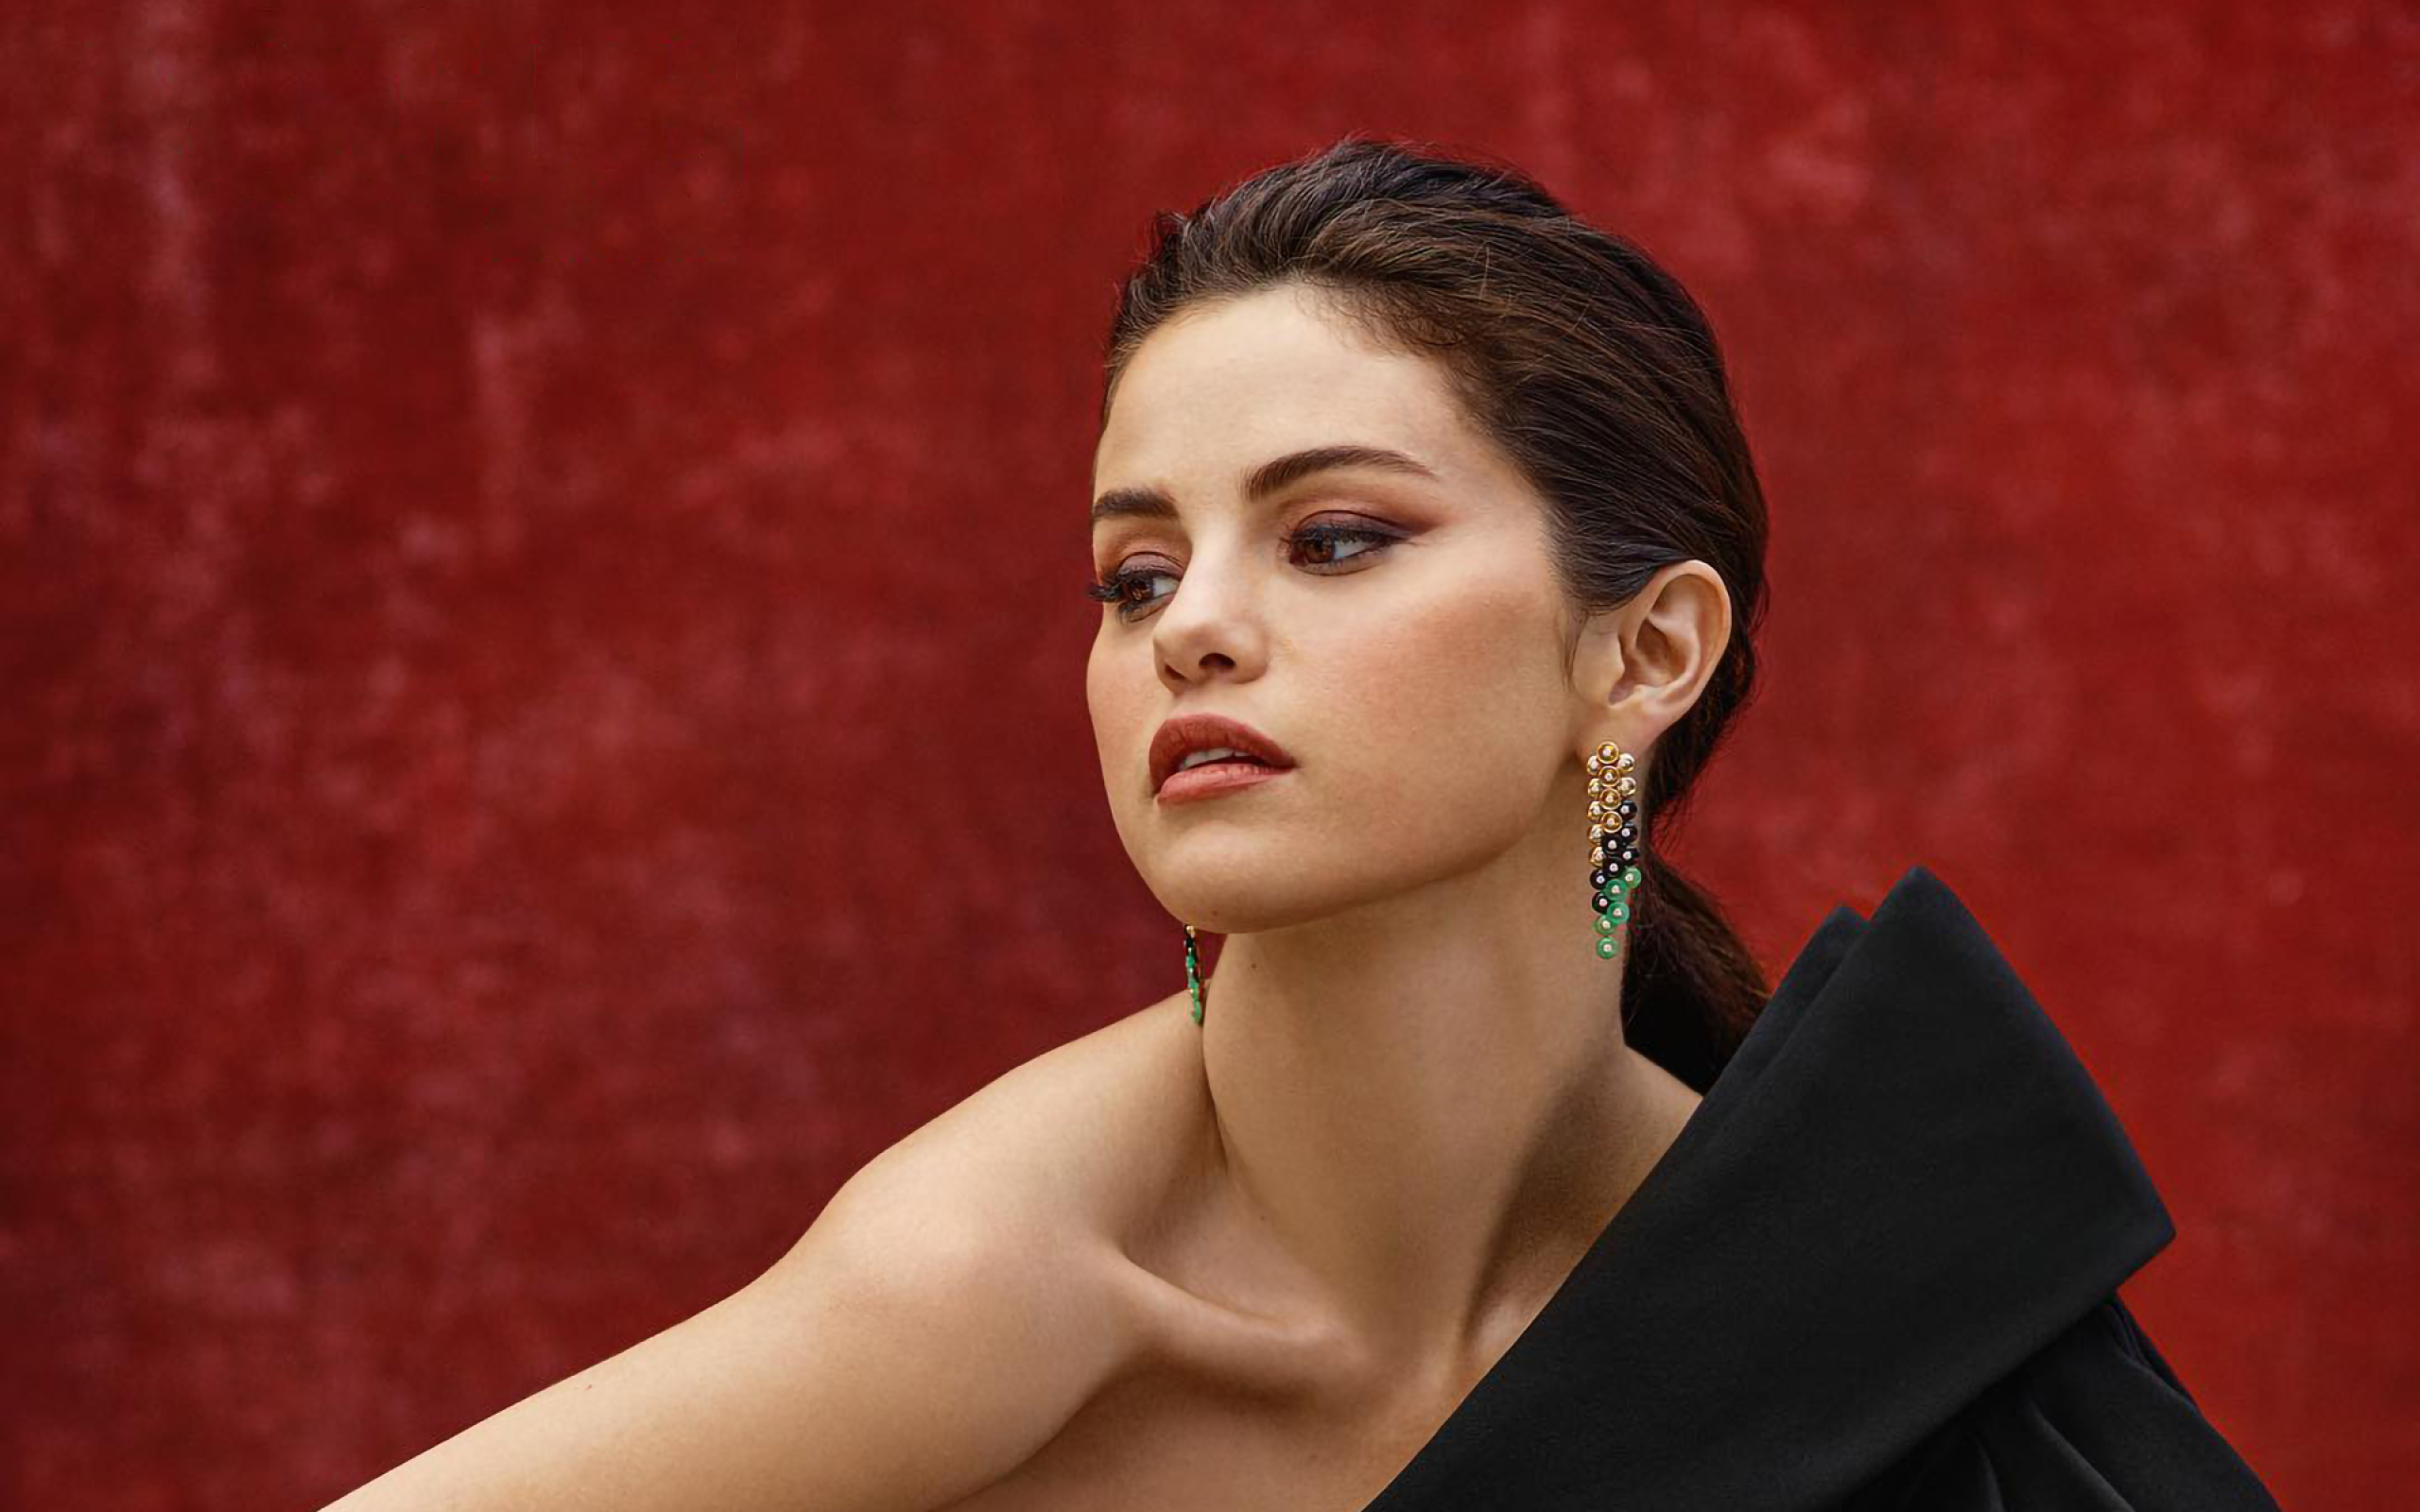 2560x1600 Selena Gomez 21 2560x1600 Resolution Wallpaper Hd Celebrities 4k Wallpapers Images Photos And Background Wallpapers Den